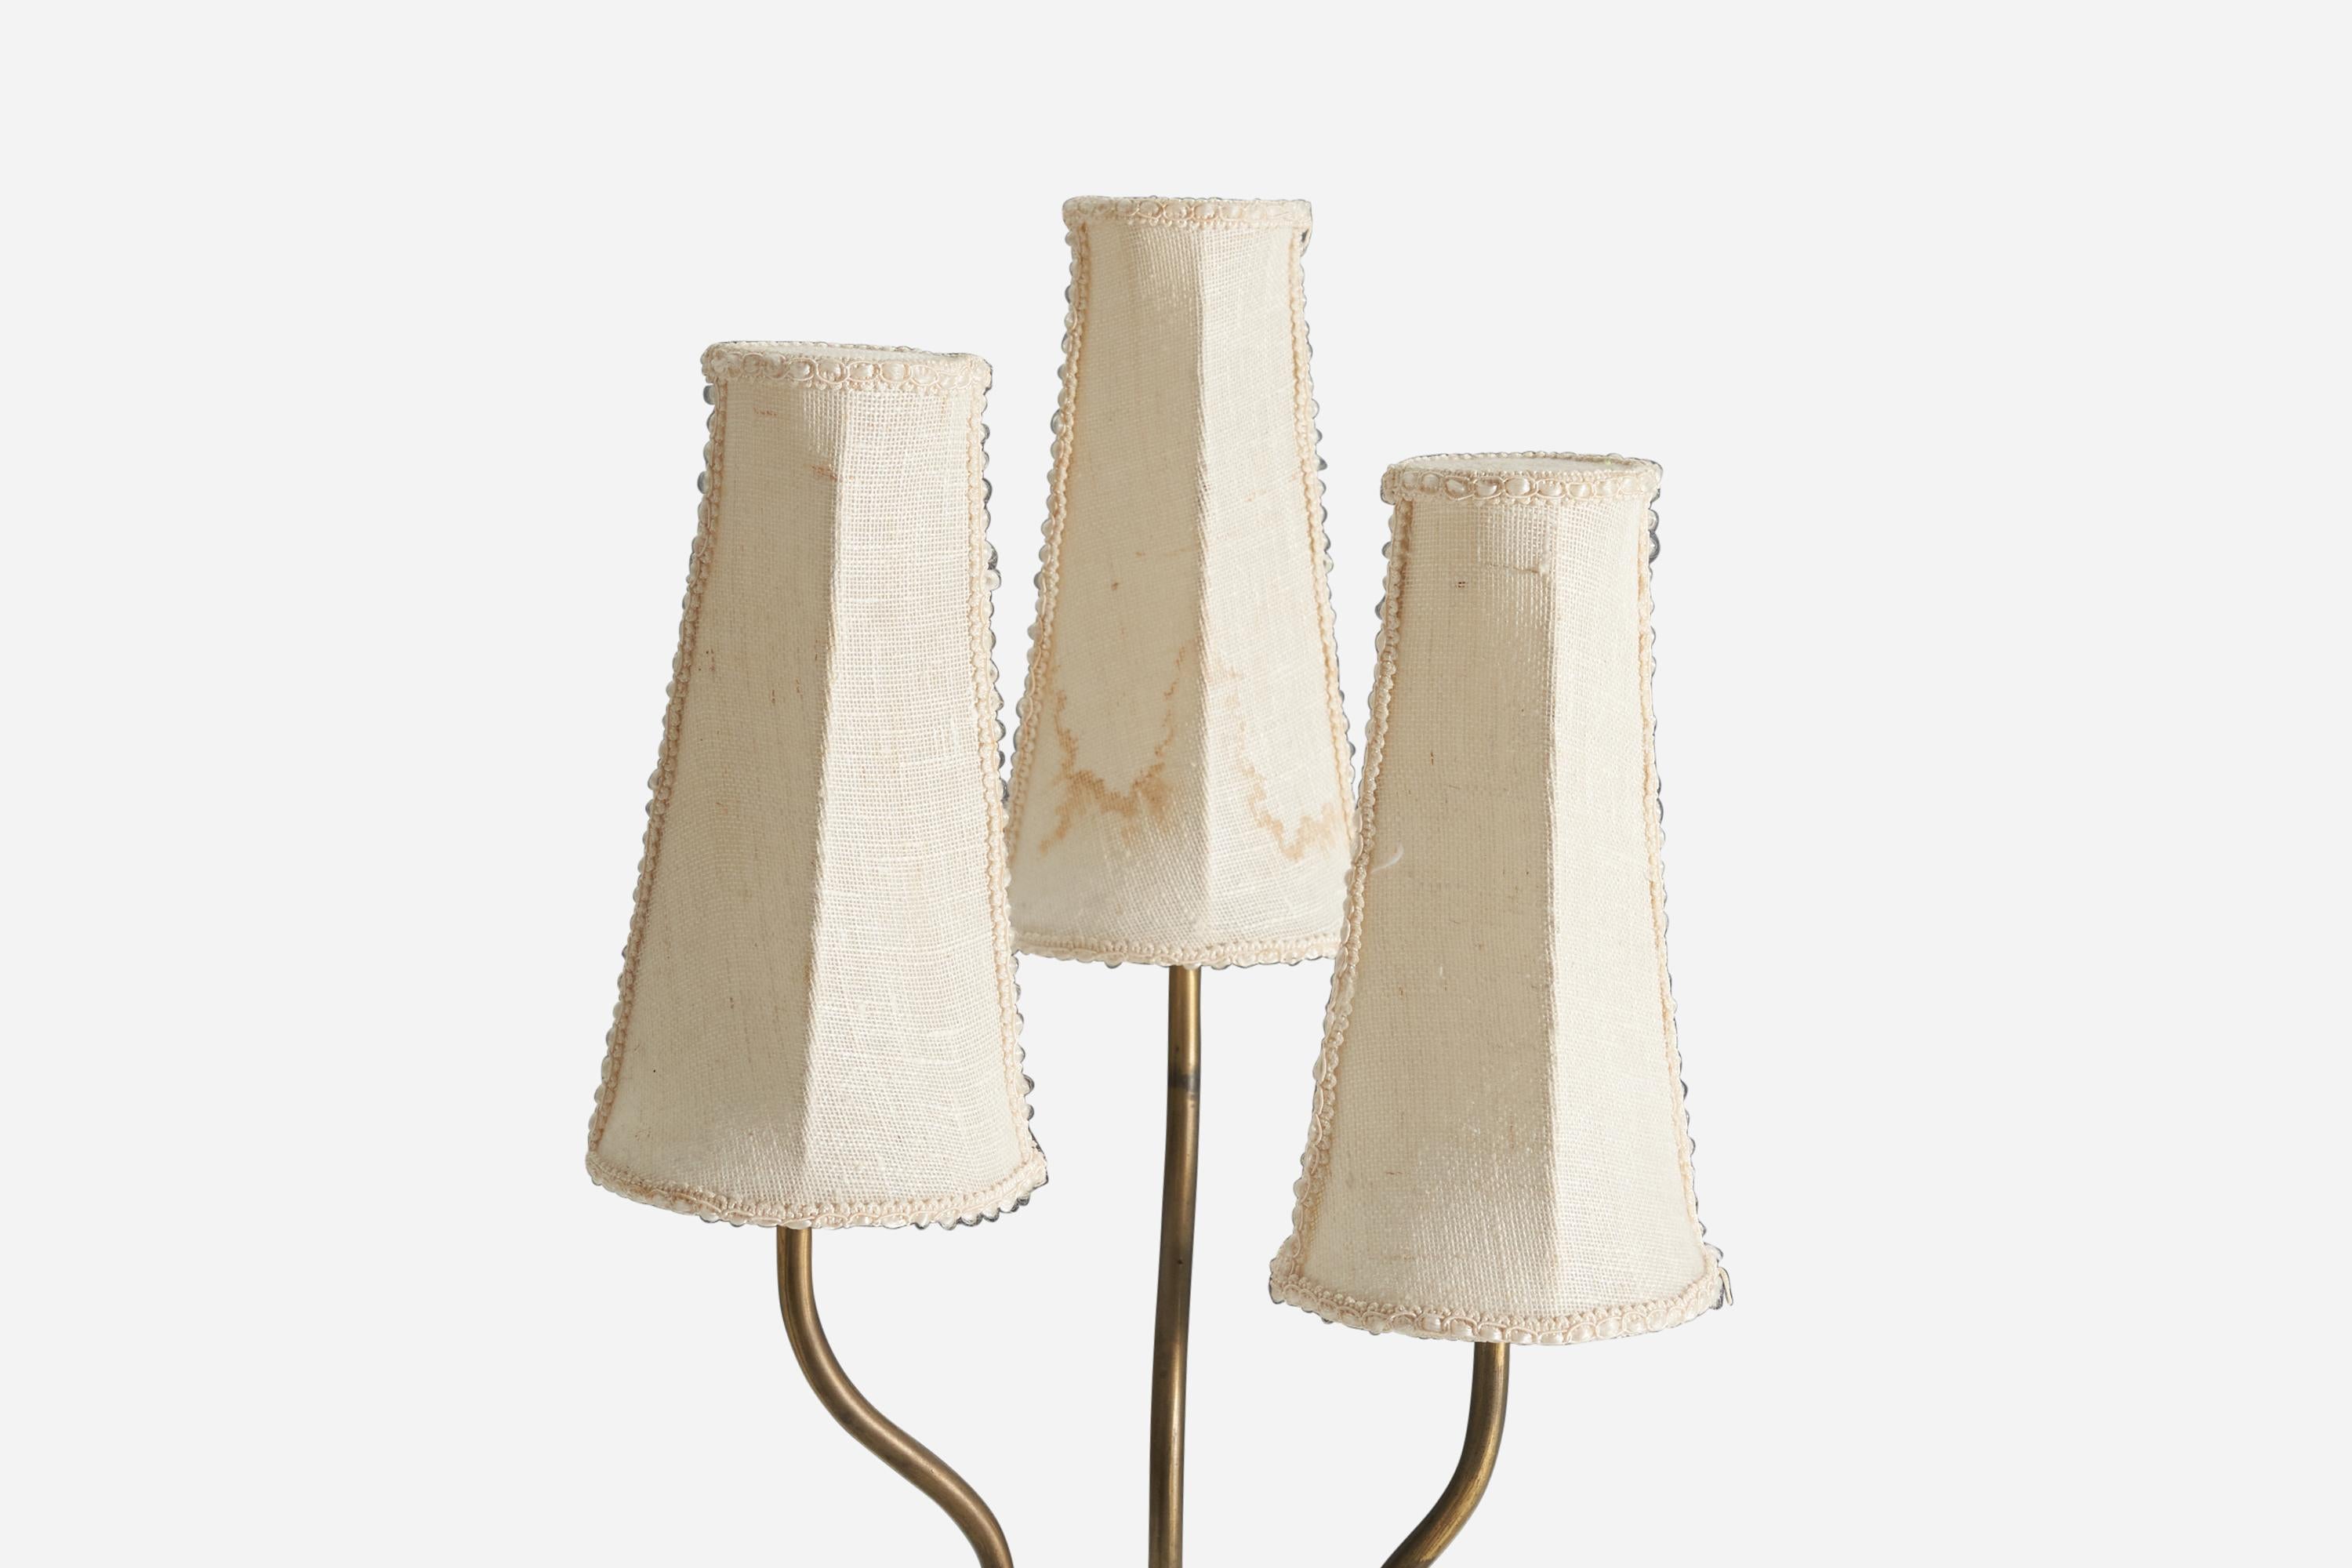 Mid-20th Century Swedish, Organic Three-Armed Table Lamp, Brass, Fabric, Sweden, 1940s For Sale